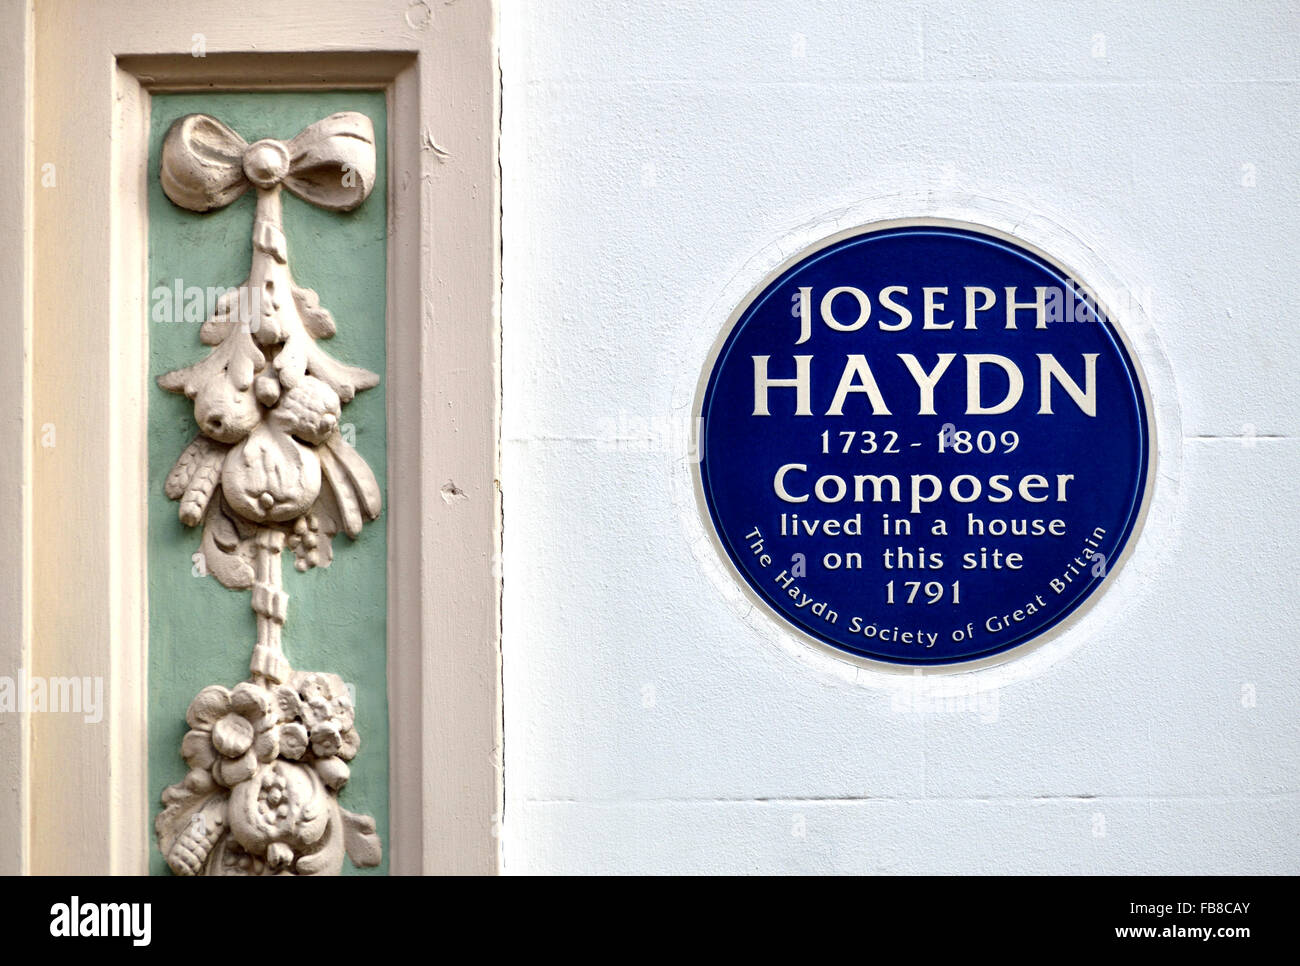 London, England, UK. Commemorative Blue Plaque: Joseph Haydn (1732 - 1809) Composer lived in a house on this site 1791.... Stock Photo